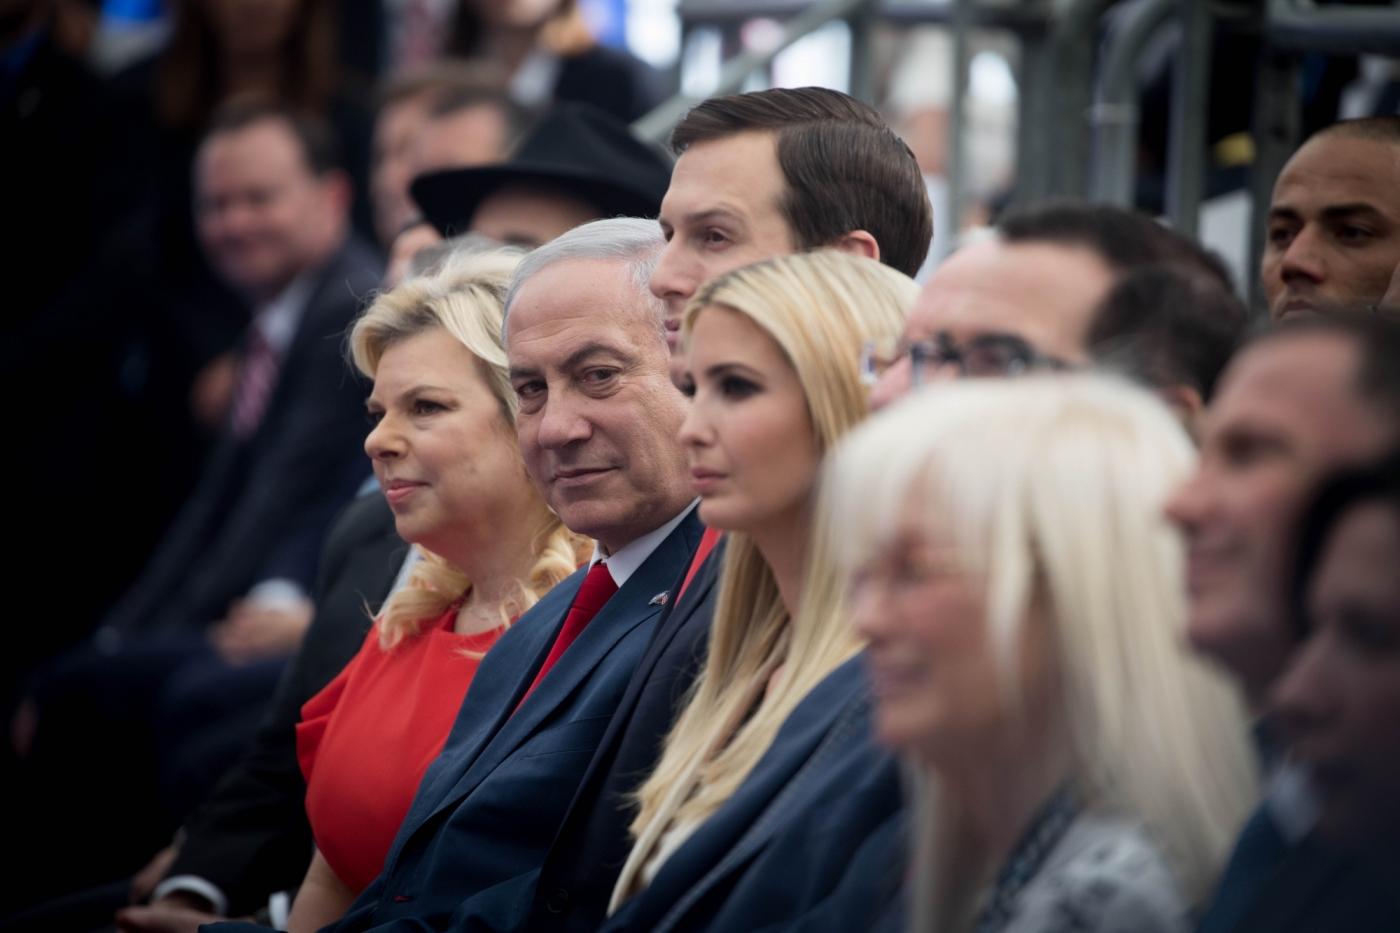 JERUSALEM, May 14, 2018 (Xinhua) -- Israeli Prime Minister Benjamin Netanyahu (2nd L, front) attends the inauguration ceremony of the new U.S. embassy in Jerusalem, on May 14, 2018. The inauguration ceremony of the new U.S. embassy in Jerusalem started on Monday afternoon, as Israeli and U.S. officials gathered in the city amidst deadly clashes in the Gaza Strip. (Xinhua/JINI/IANS) by .